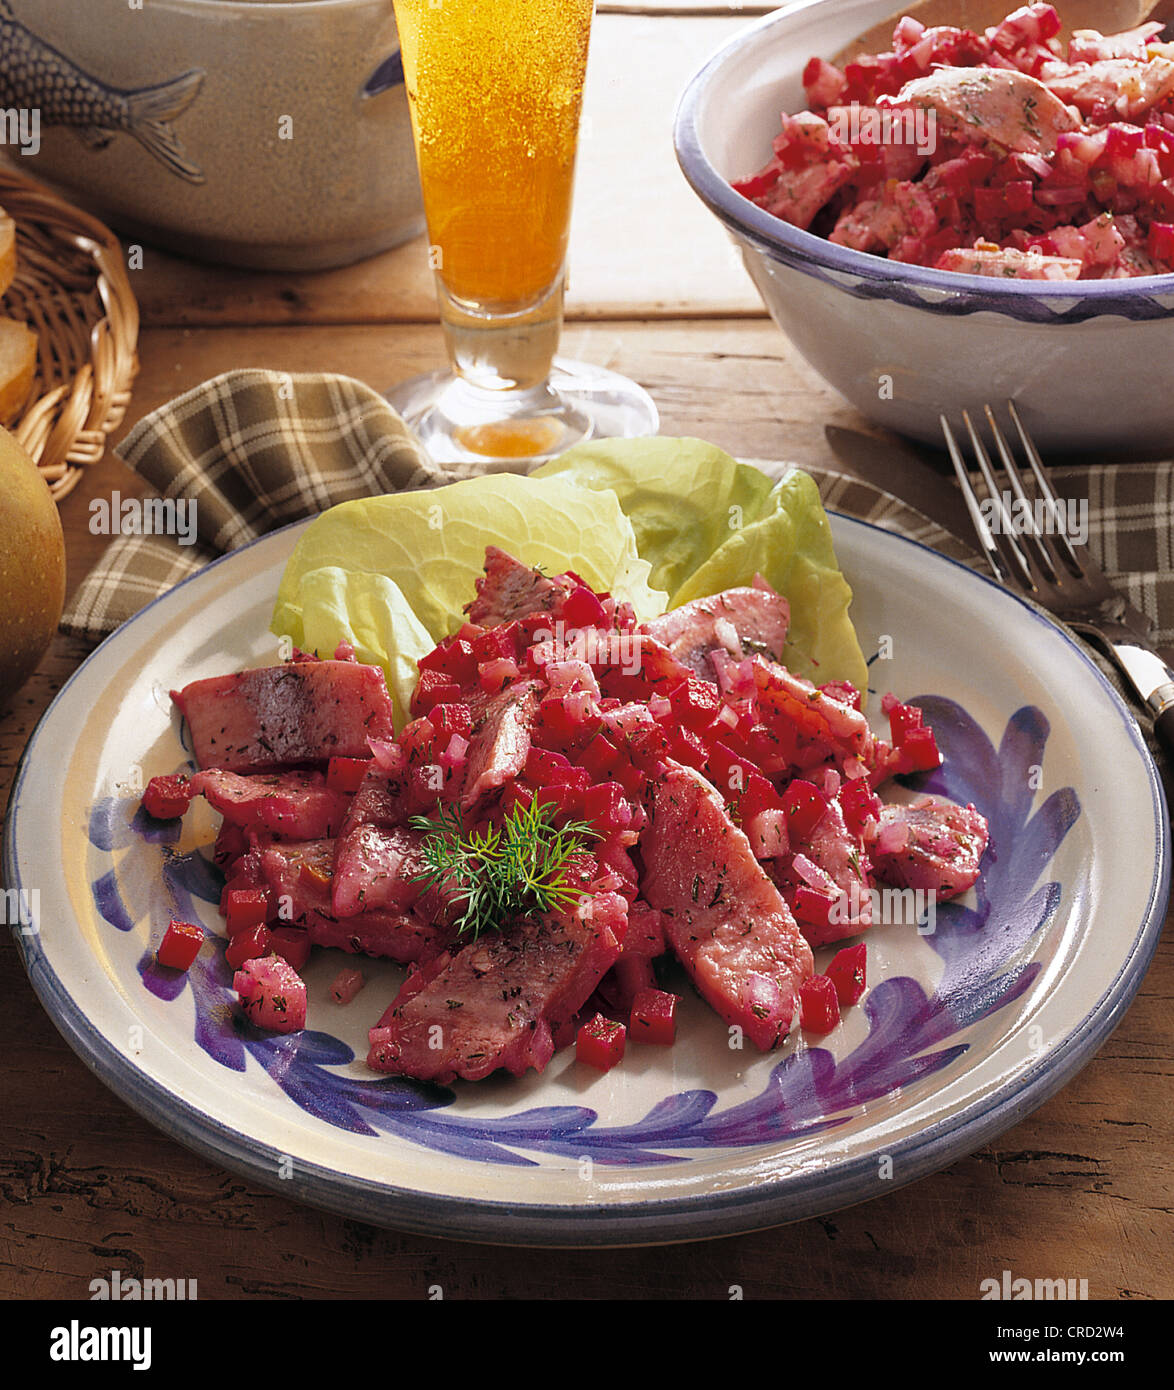 Red herring salad, mild young herring, beetroot and apple pieces in a fine dill dressing, Germany. Stock Photo